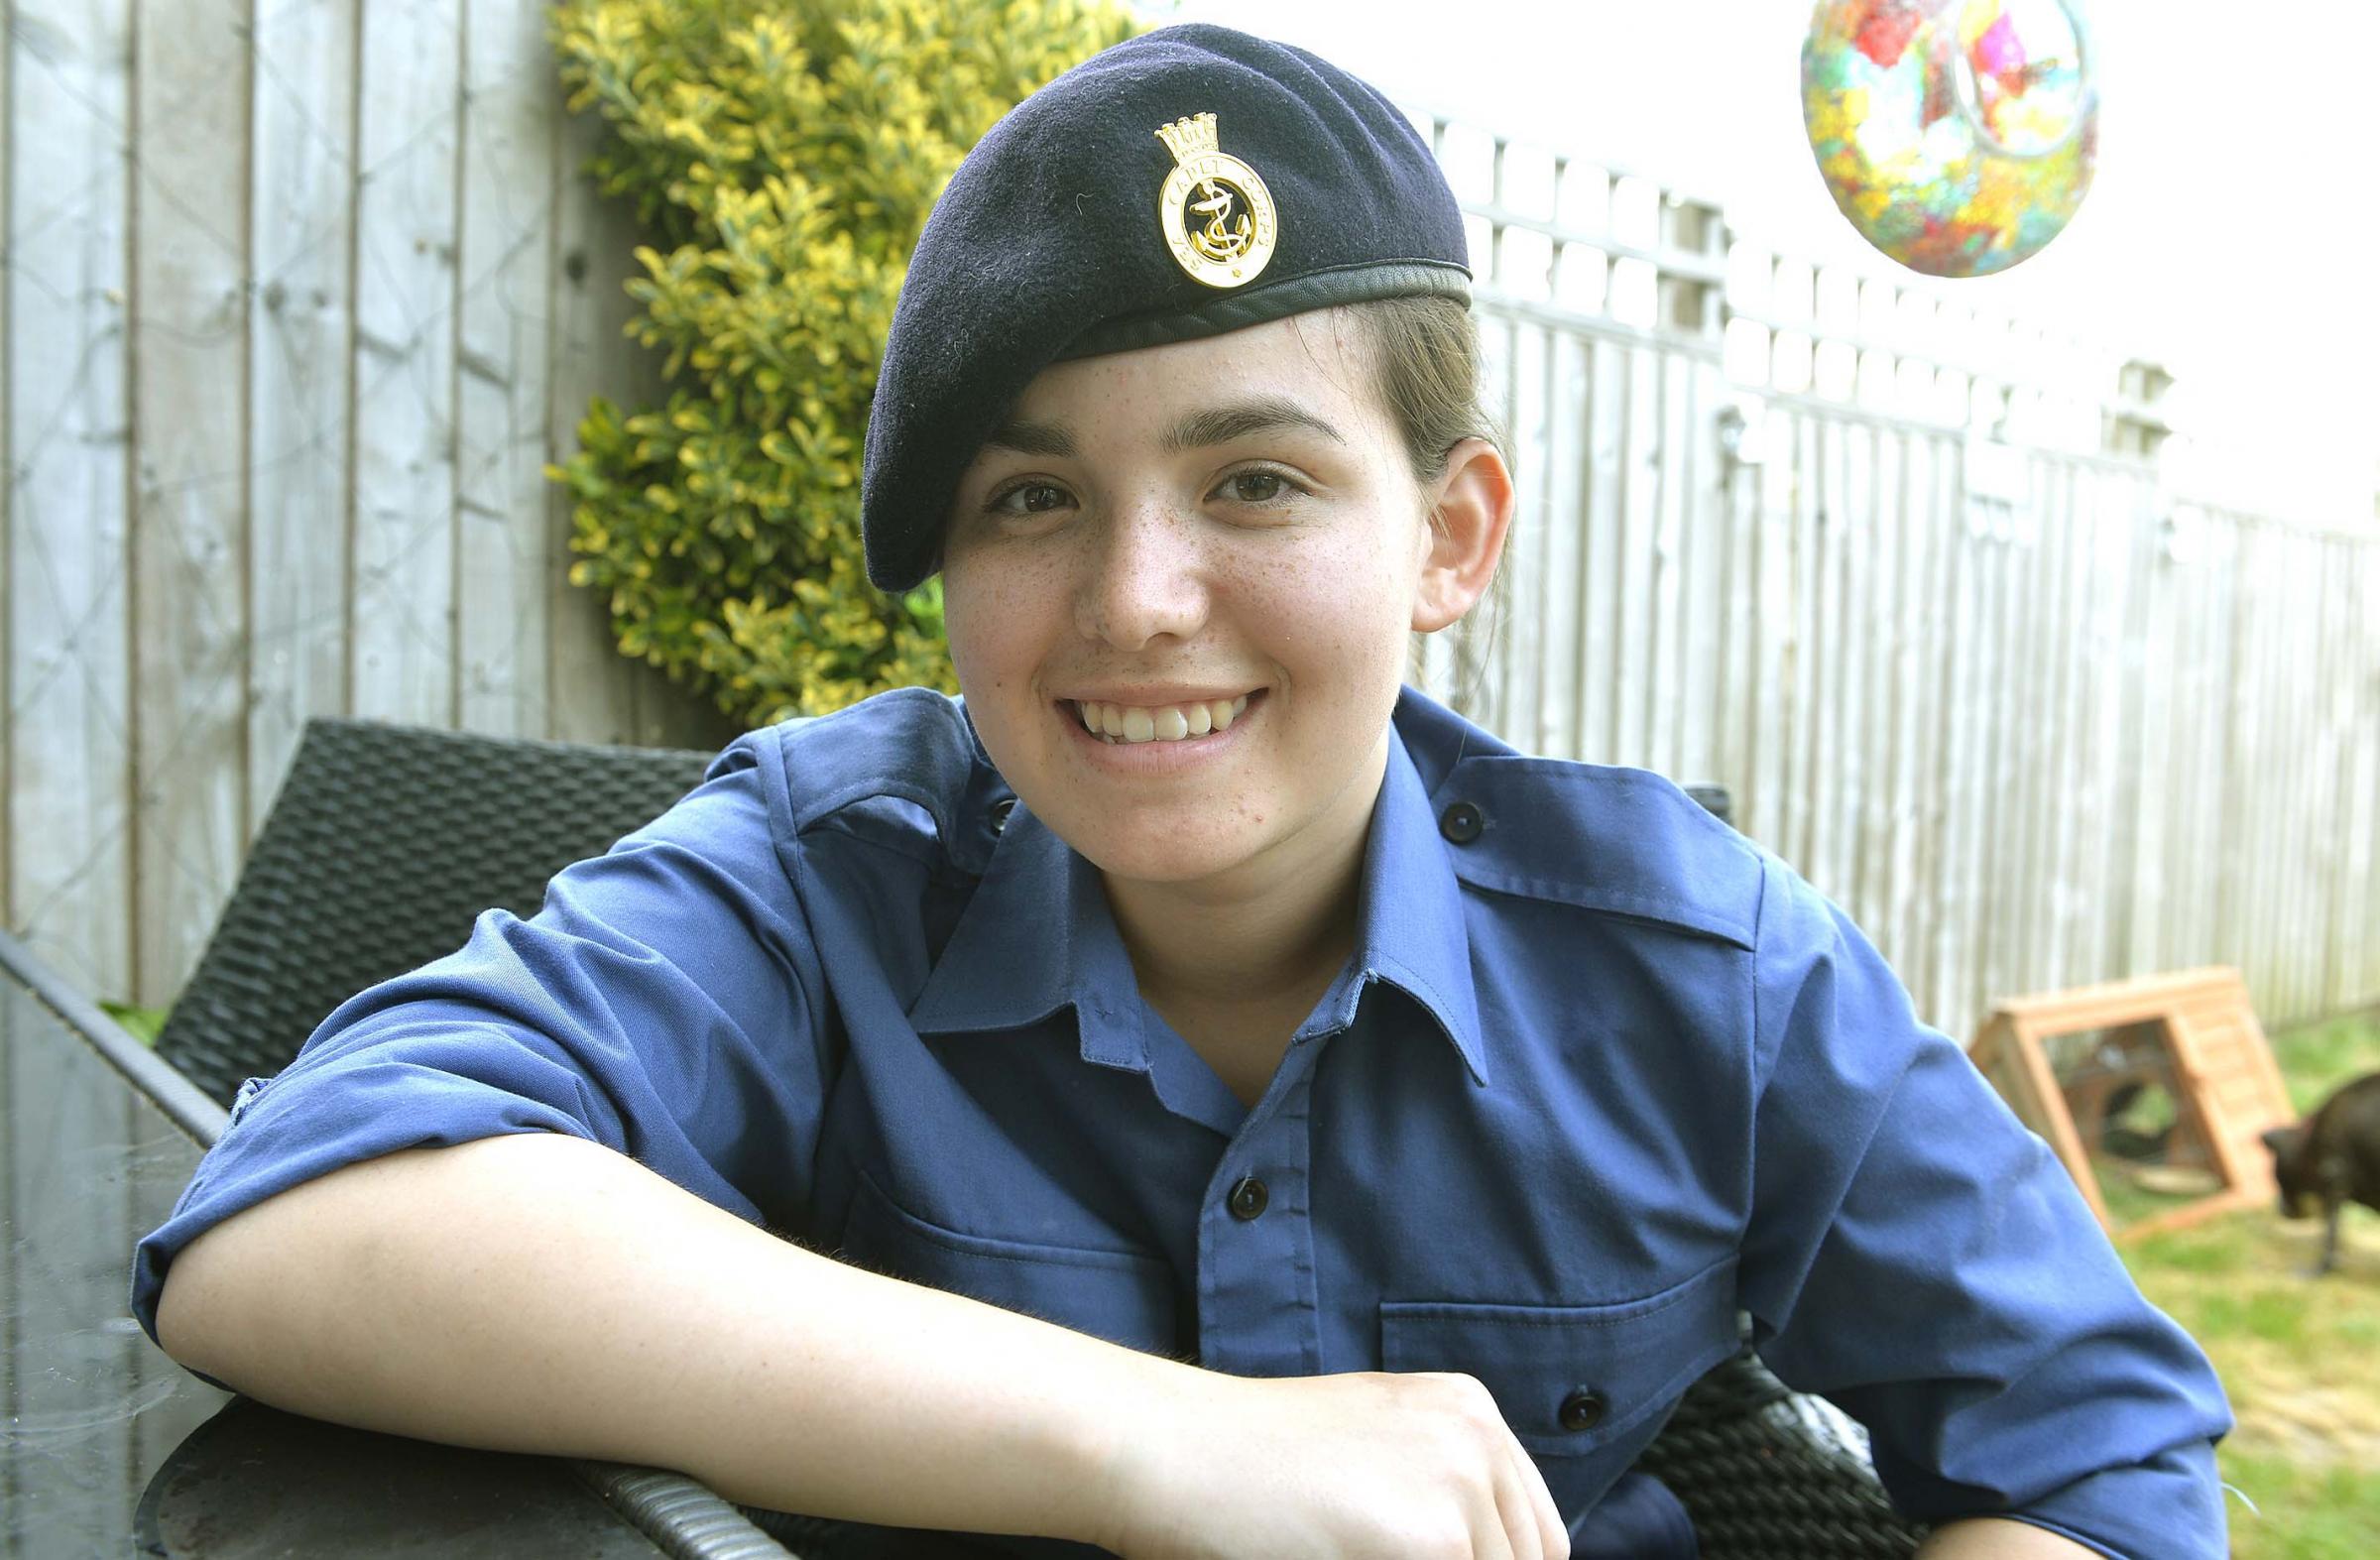 Cadet saves choking girl  thanks to first aid training